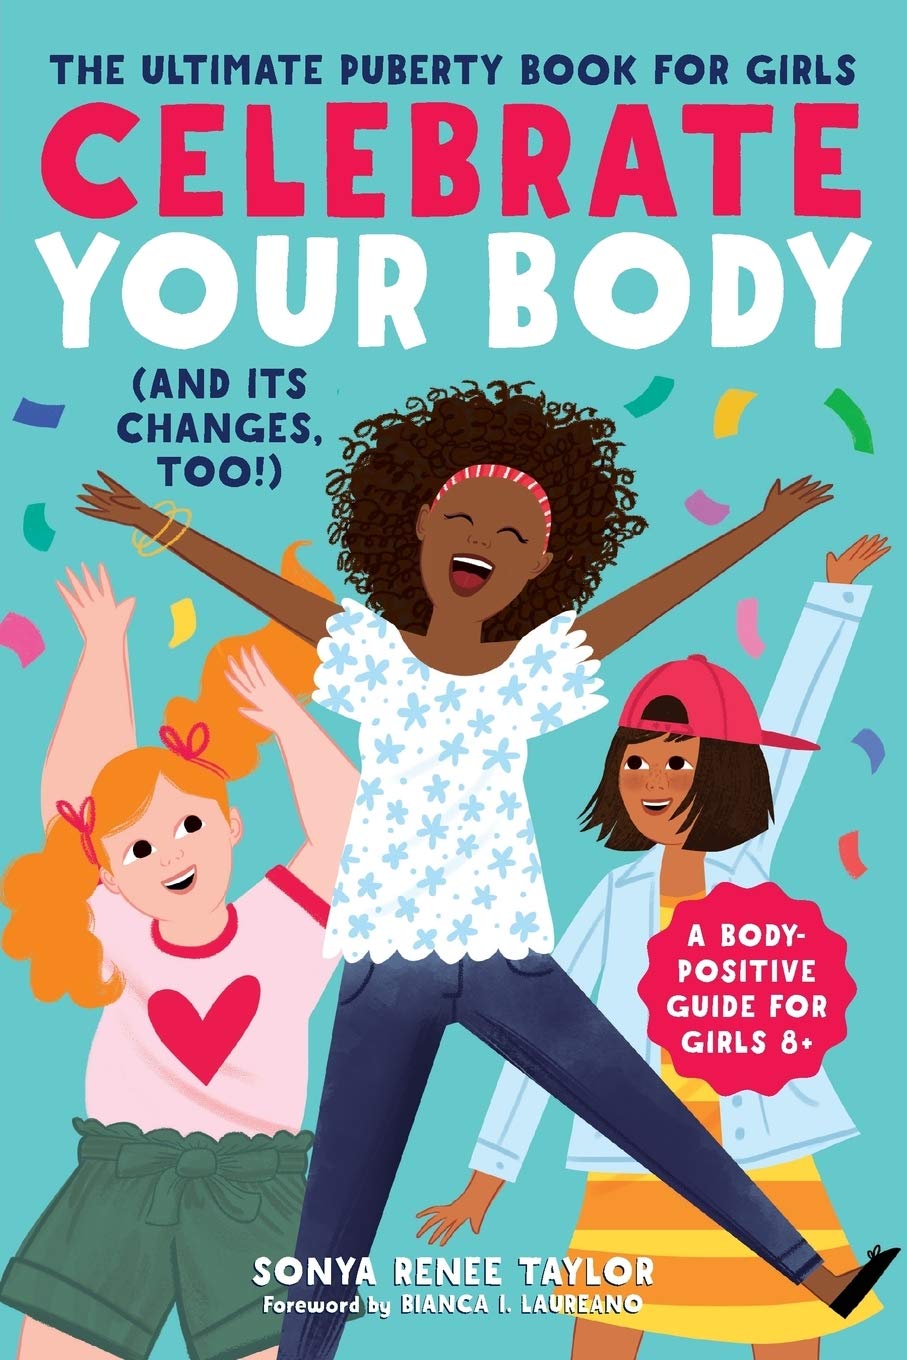 Celebrate Your Body (and Its Changes, Too!): The Ultimate Puberty Book for Girls [Sonya Renee Taylor]